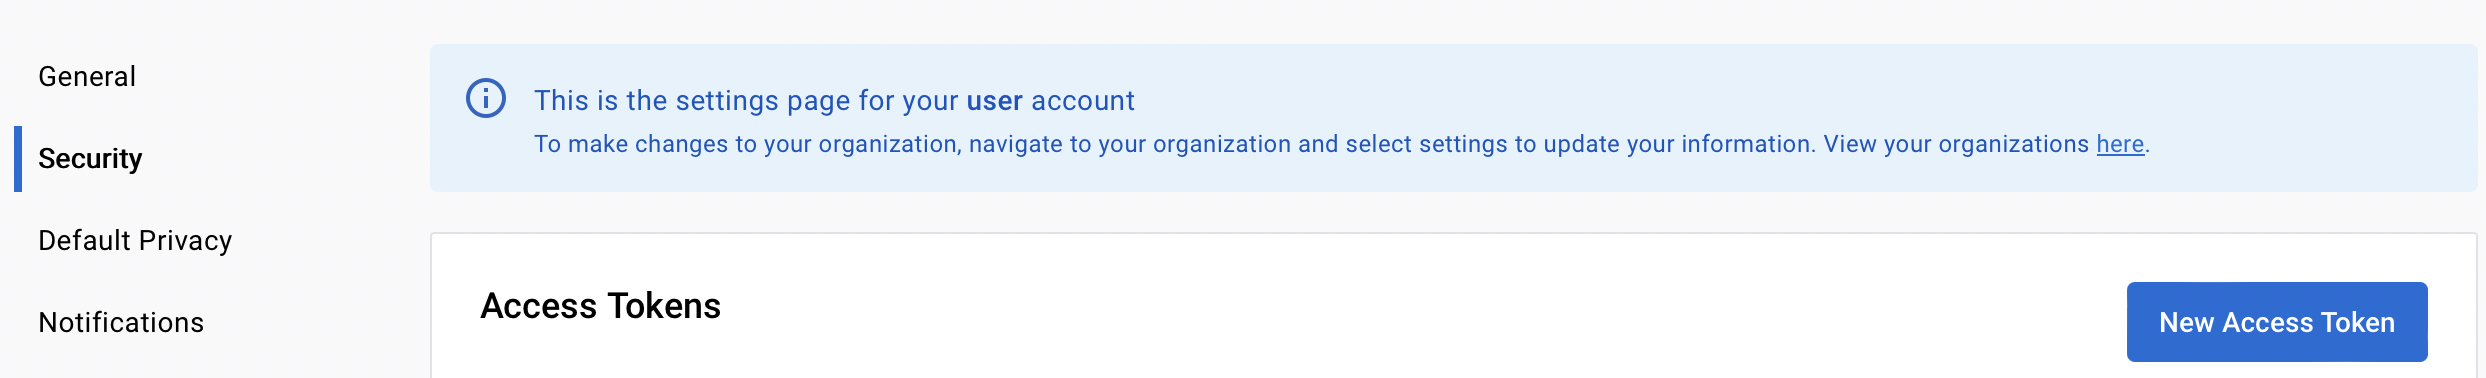 DockerHub - Account page with the "Security" tab active and a rectangle highlighting the "New Access Token" button in the UI